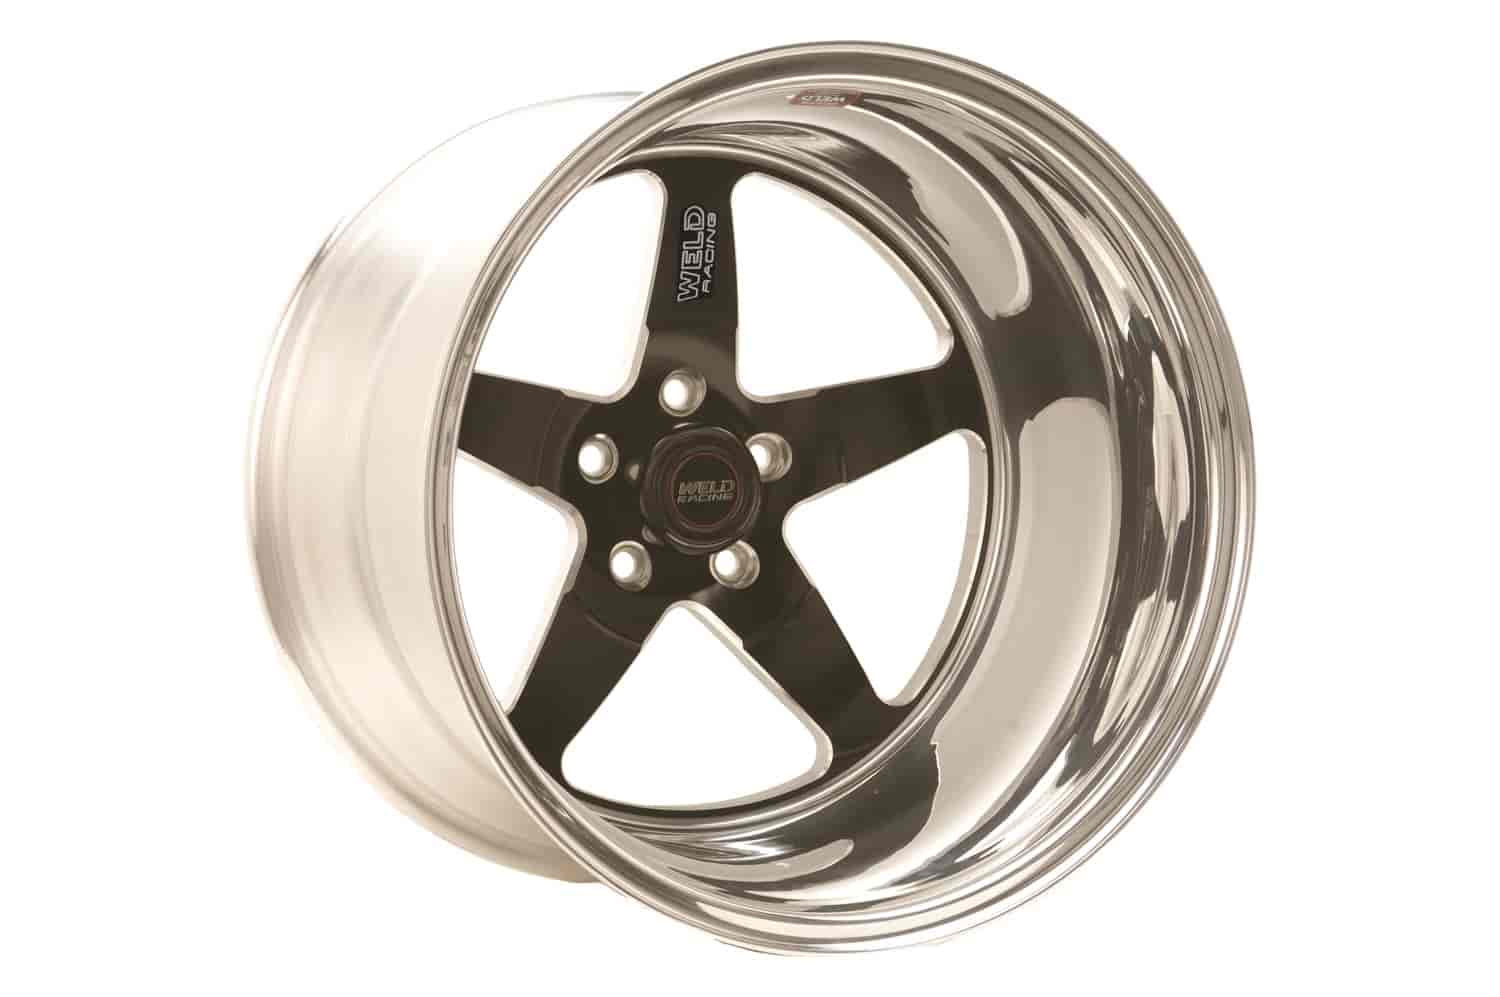 RT-S Series S71 Wheel Size: 15" x 4" Bolt Circle: 5 x 4-3/4" Back Space: 1.63"